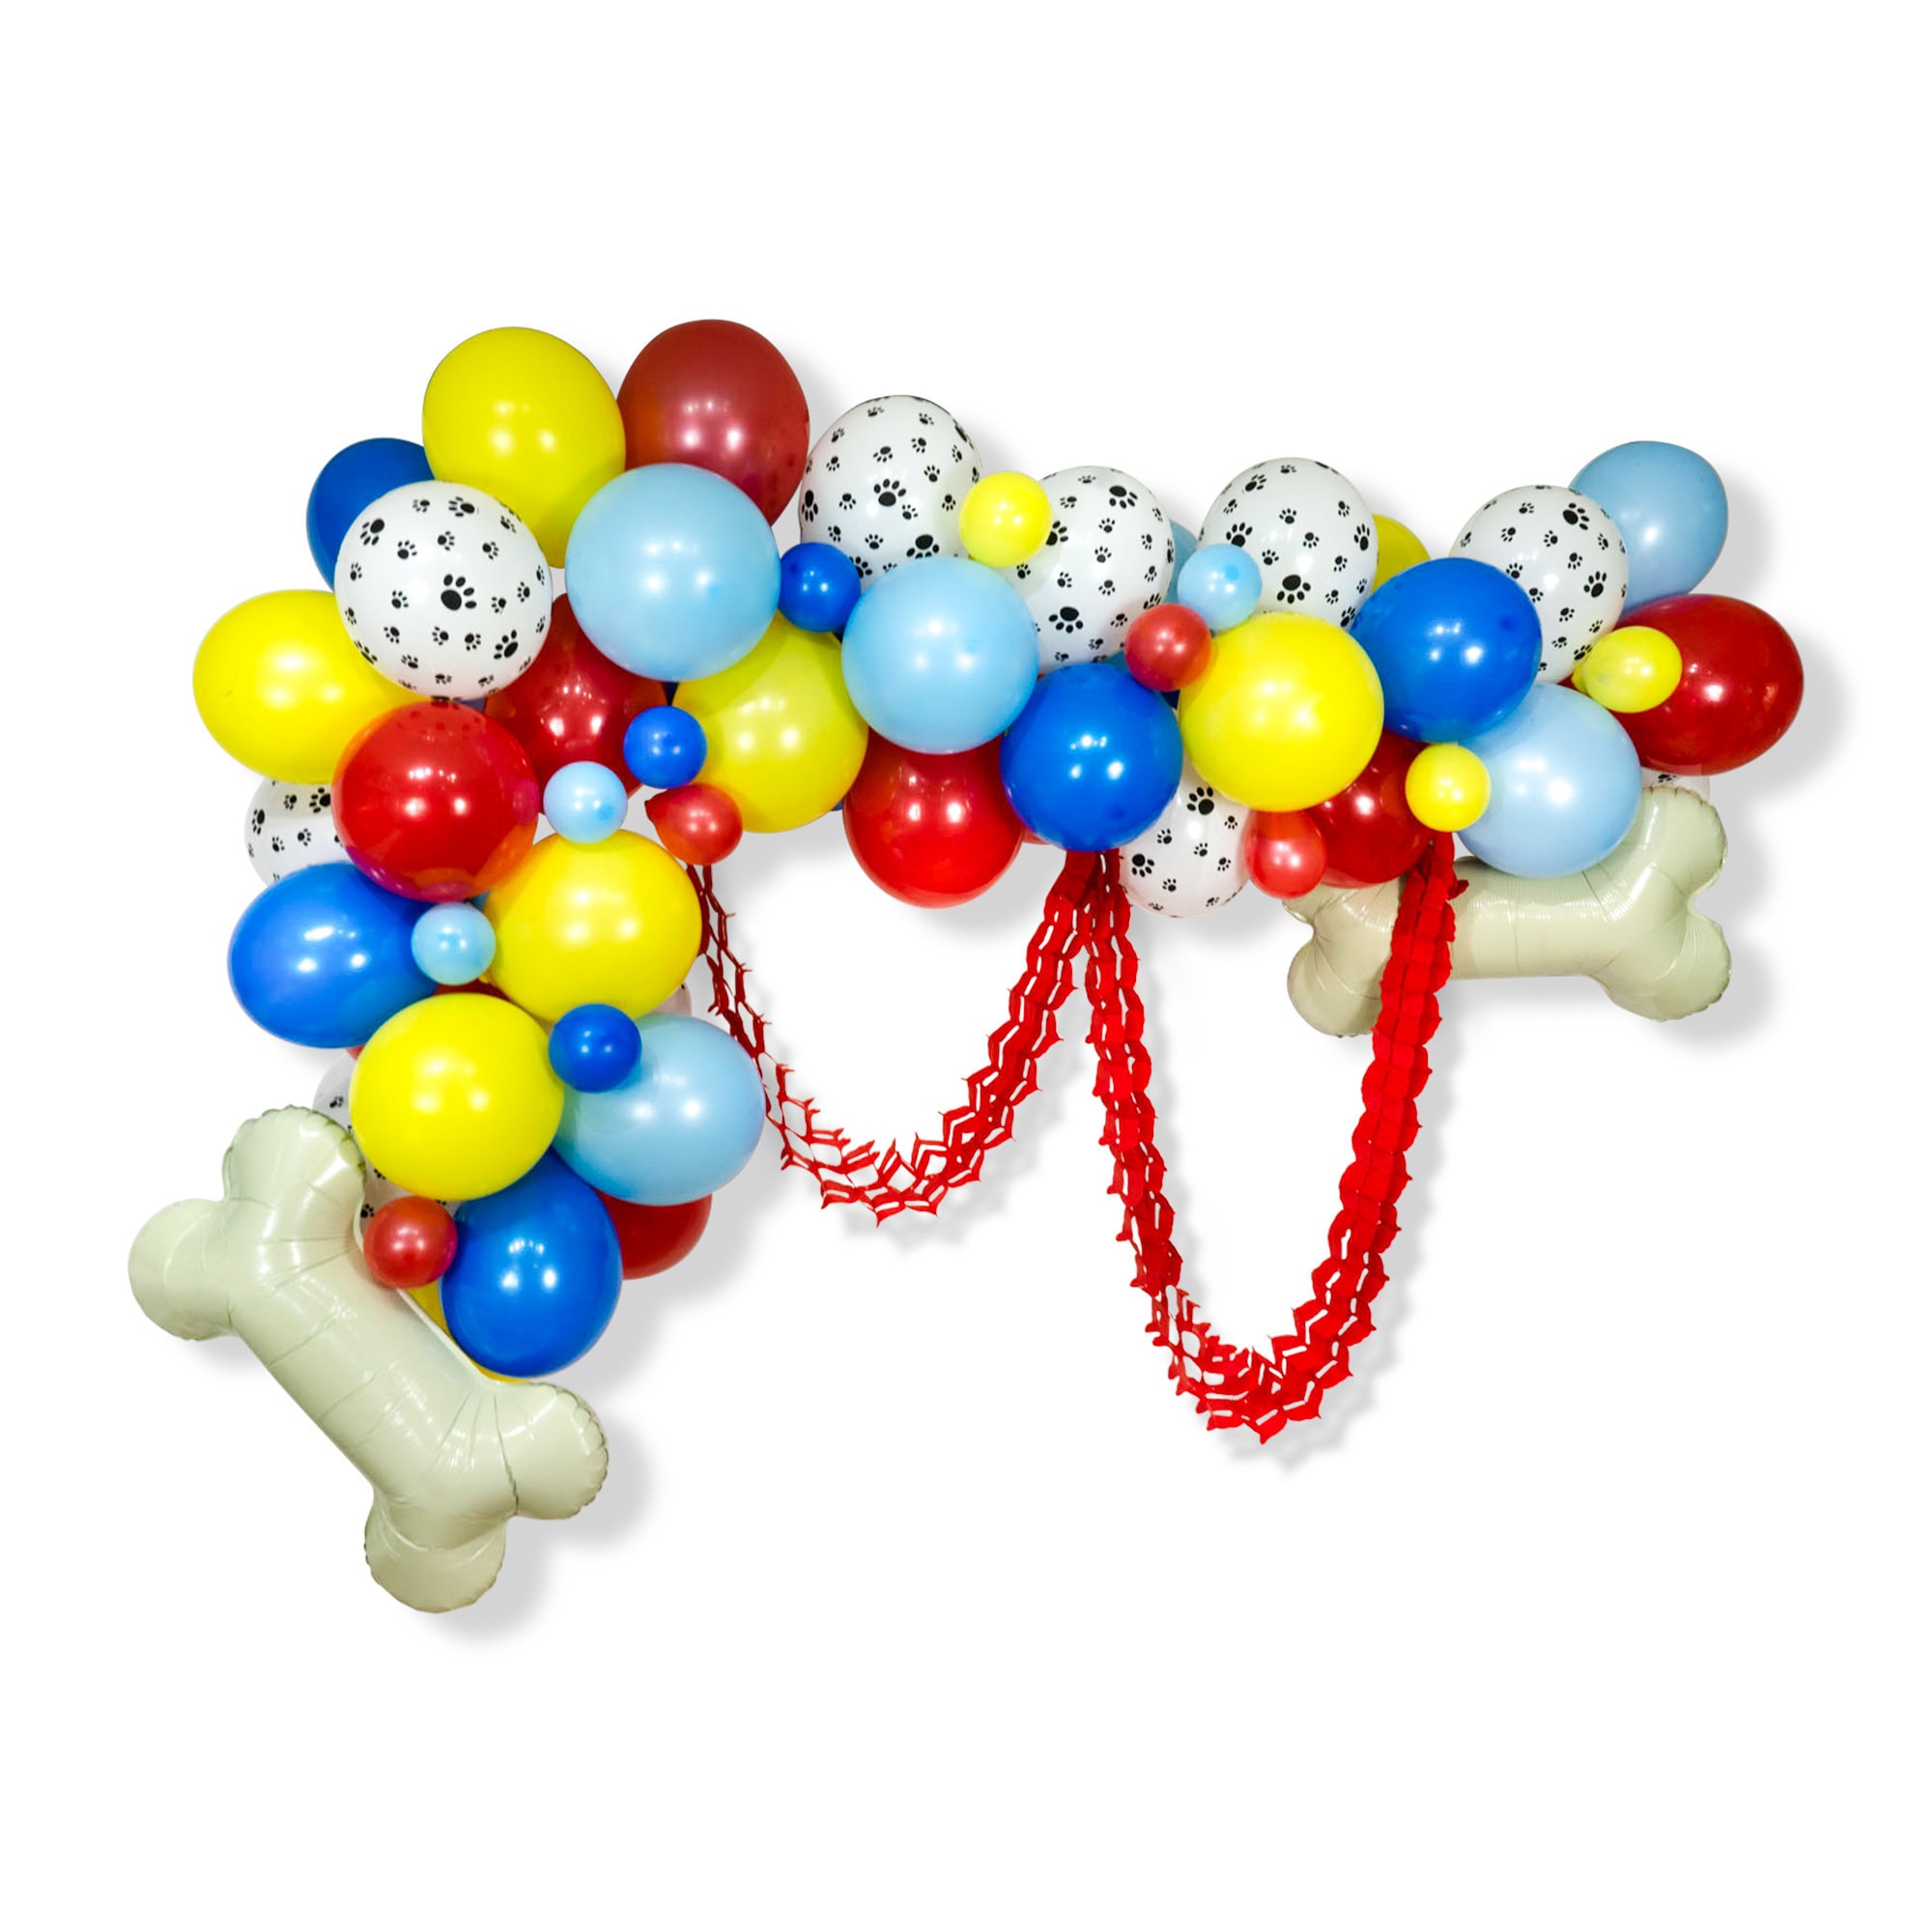 Balloon Garland Kit Red Blue Yellow Giant Balloon Arch photo pic